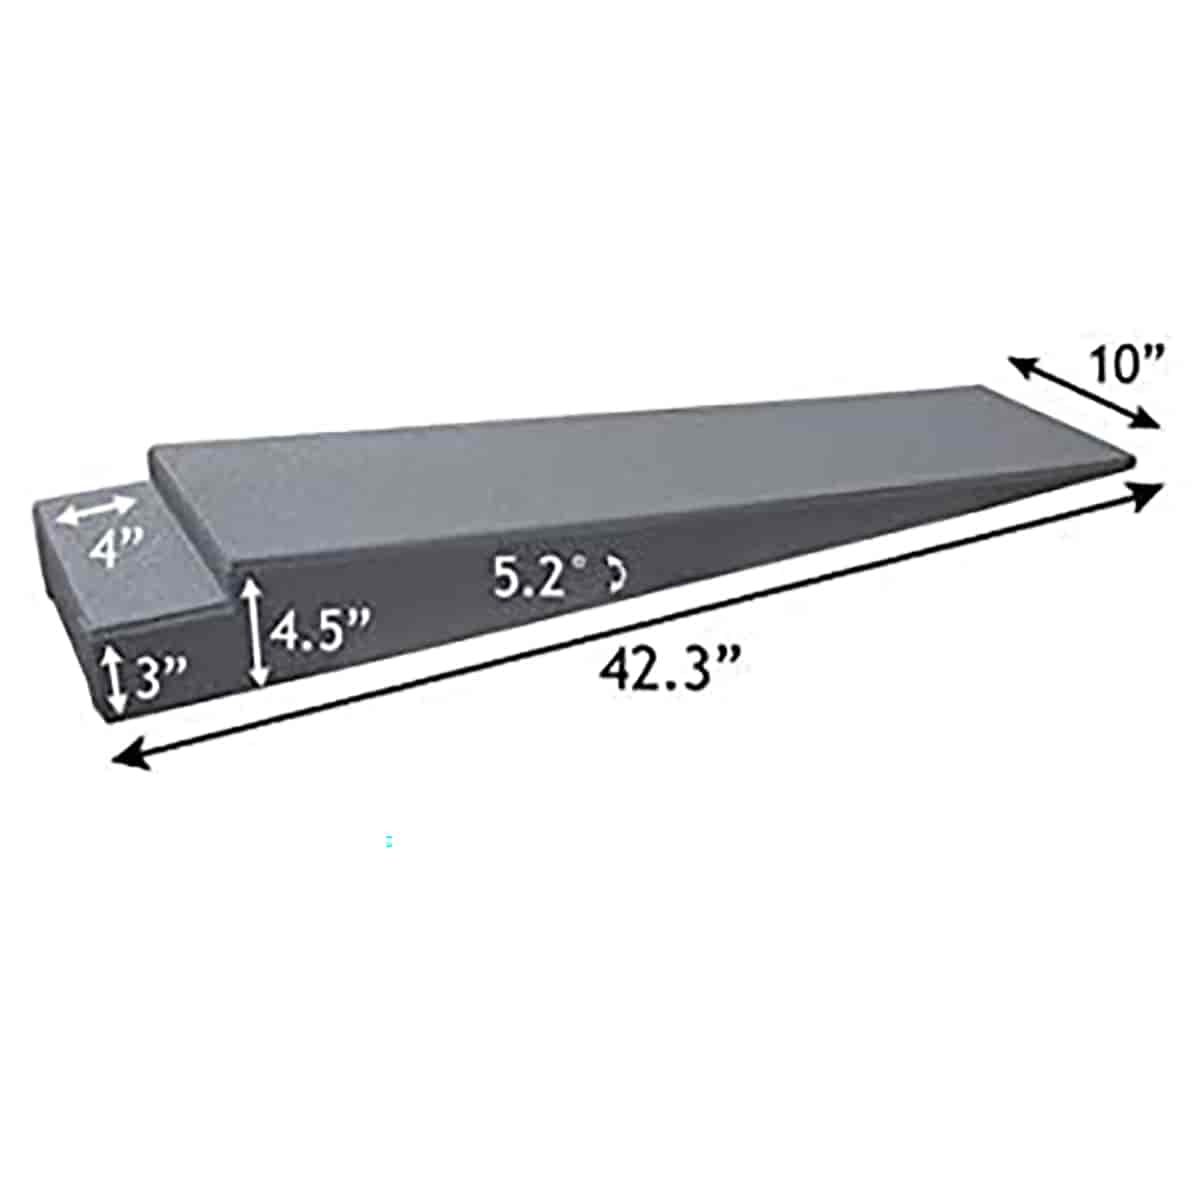 42.3 in. Compact Tow Ramps with 5.2 Degree Approach